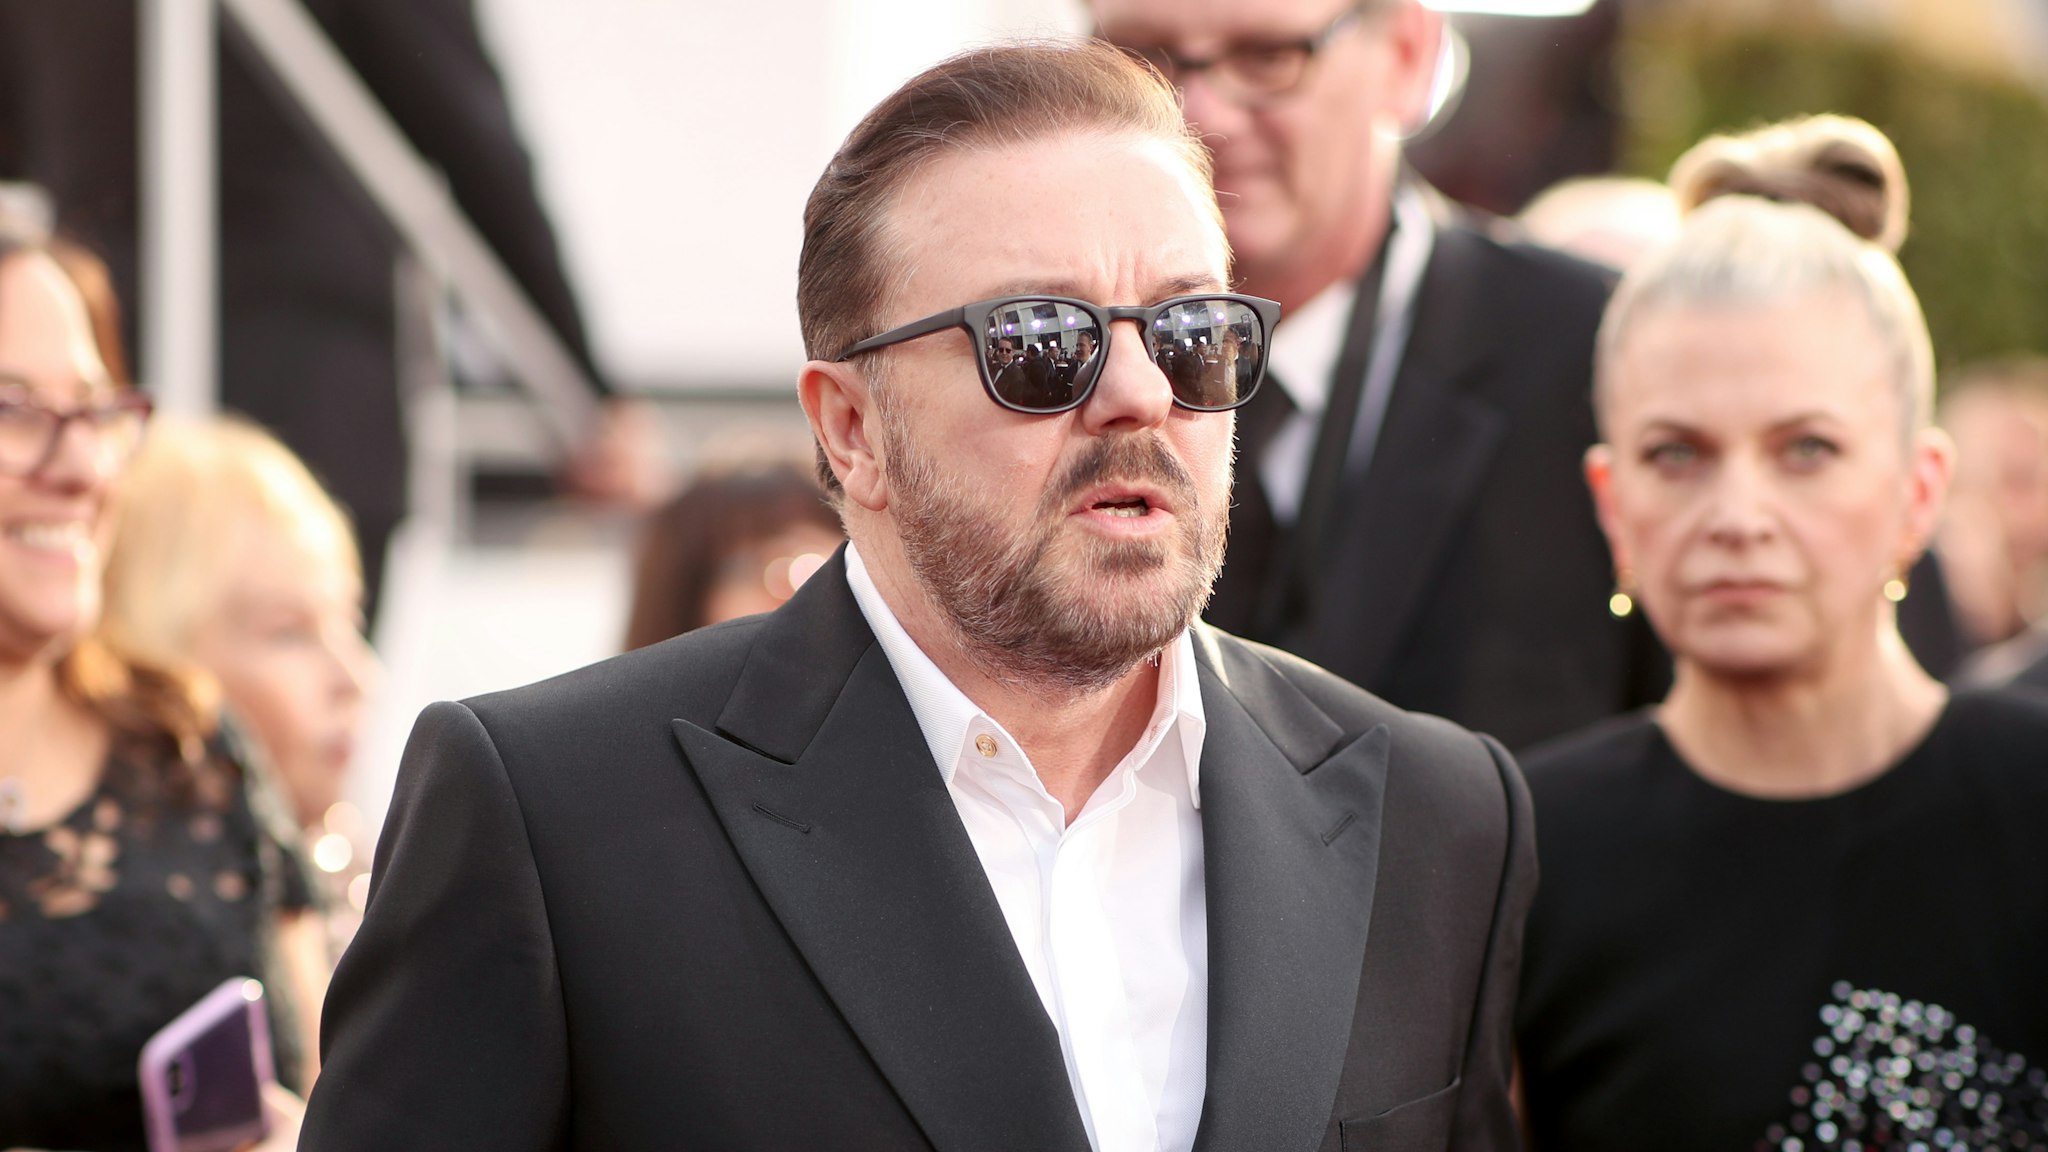 Ricky Gervais arrives to the 77th Annual Golden Globe Awards held at the Beverly Hilton Hotel on January 5, 2020.